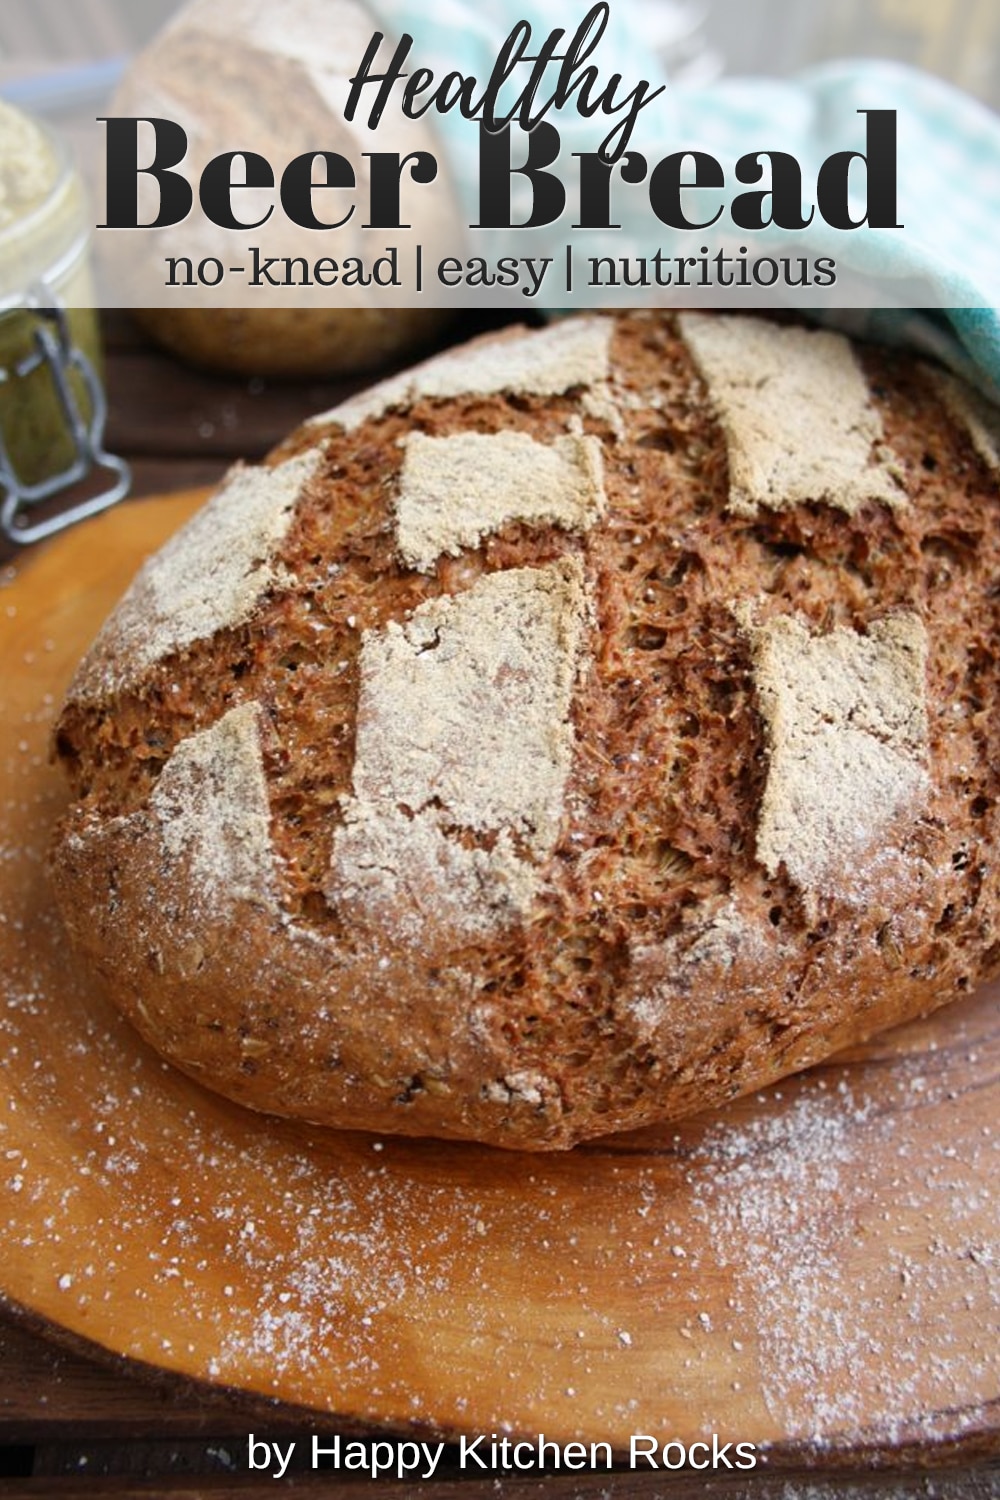 Easy No-Knead Beer Bread Closeup Collage with Text Overlay